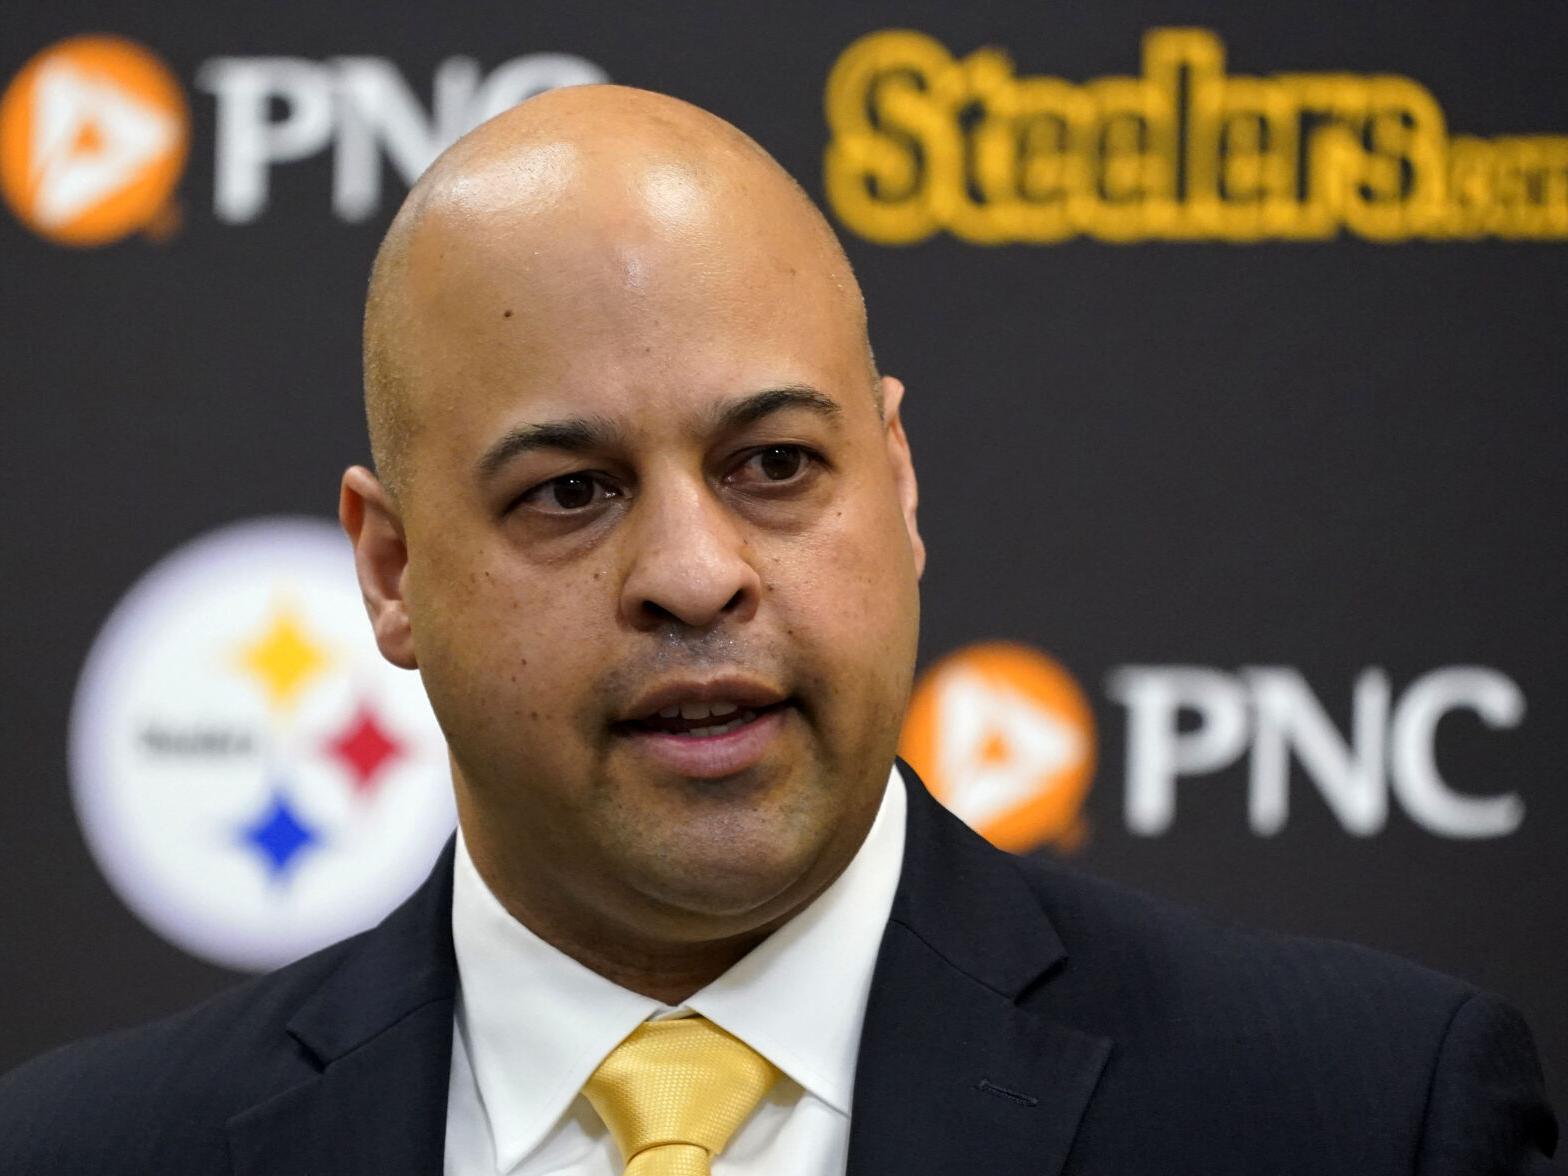 Omar Khan still making big moves for the Steelers.